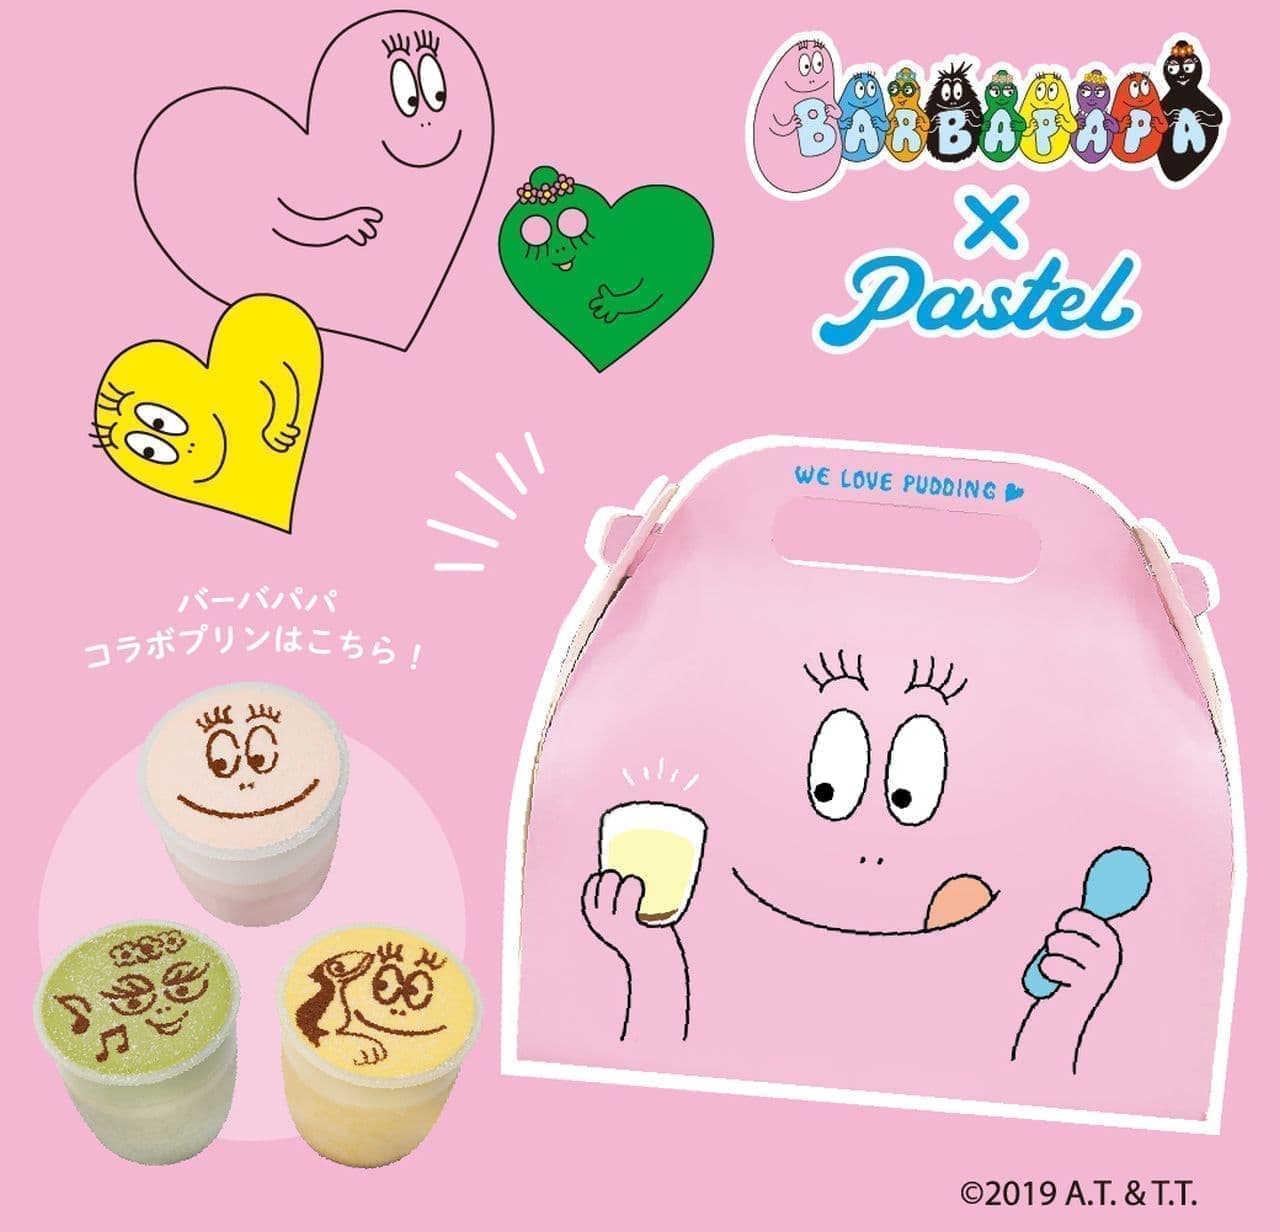 Collaboration pudding with "Barbapapa" in pastel